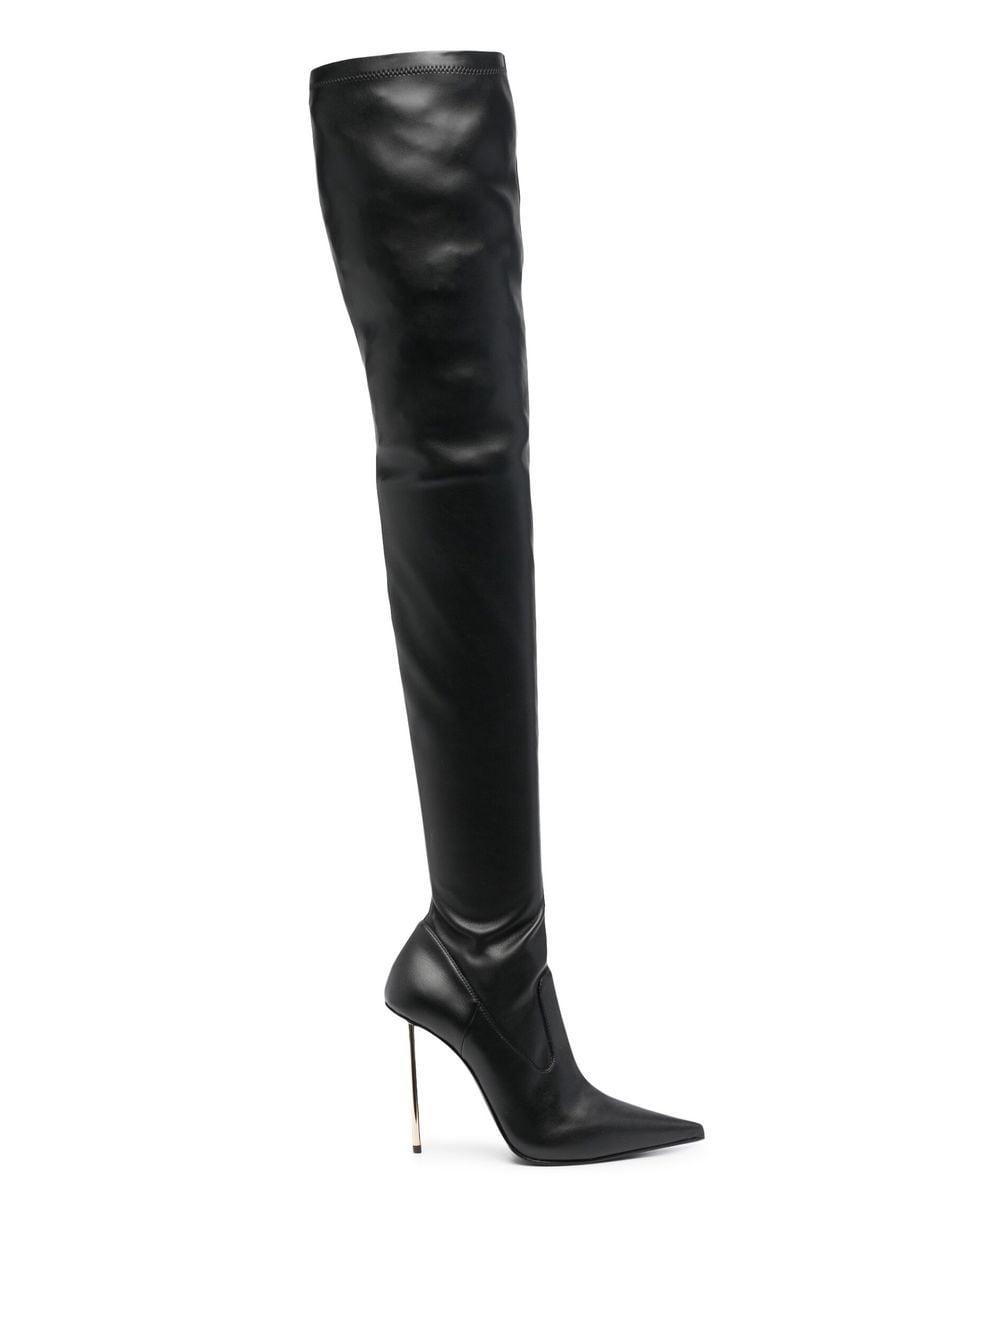 Le Silla Bella 115mm Thigh-high Boots in Black | Lyst UK